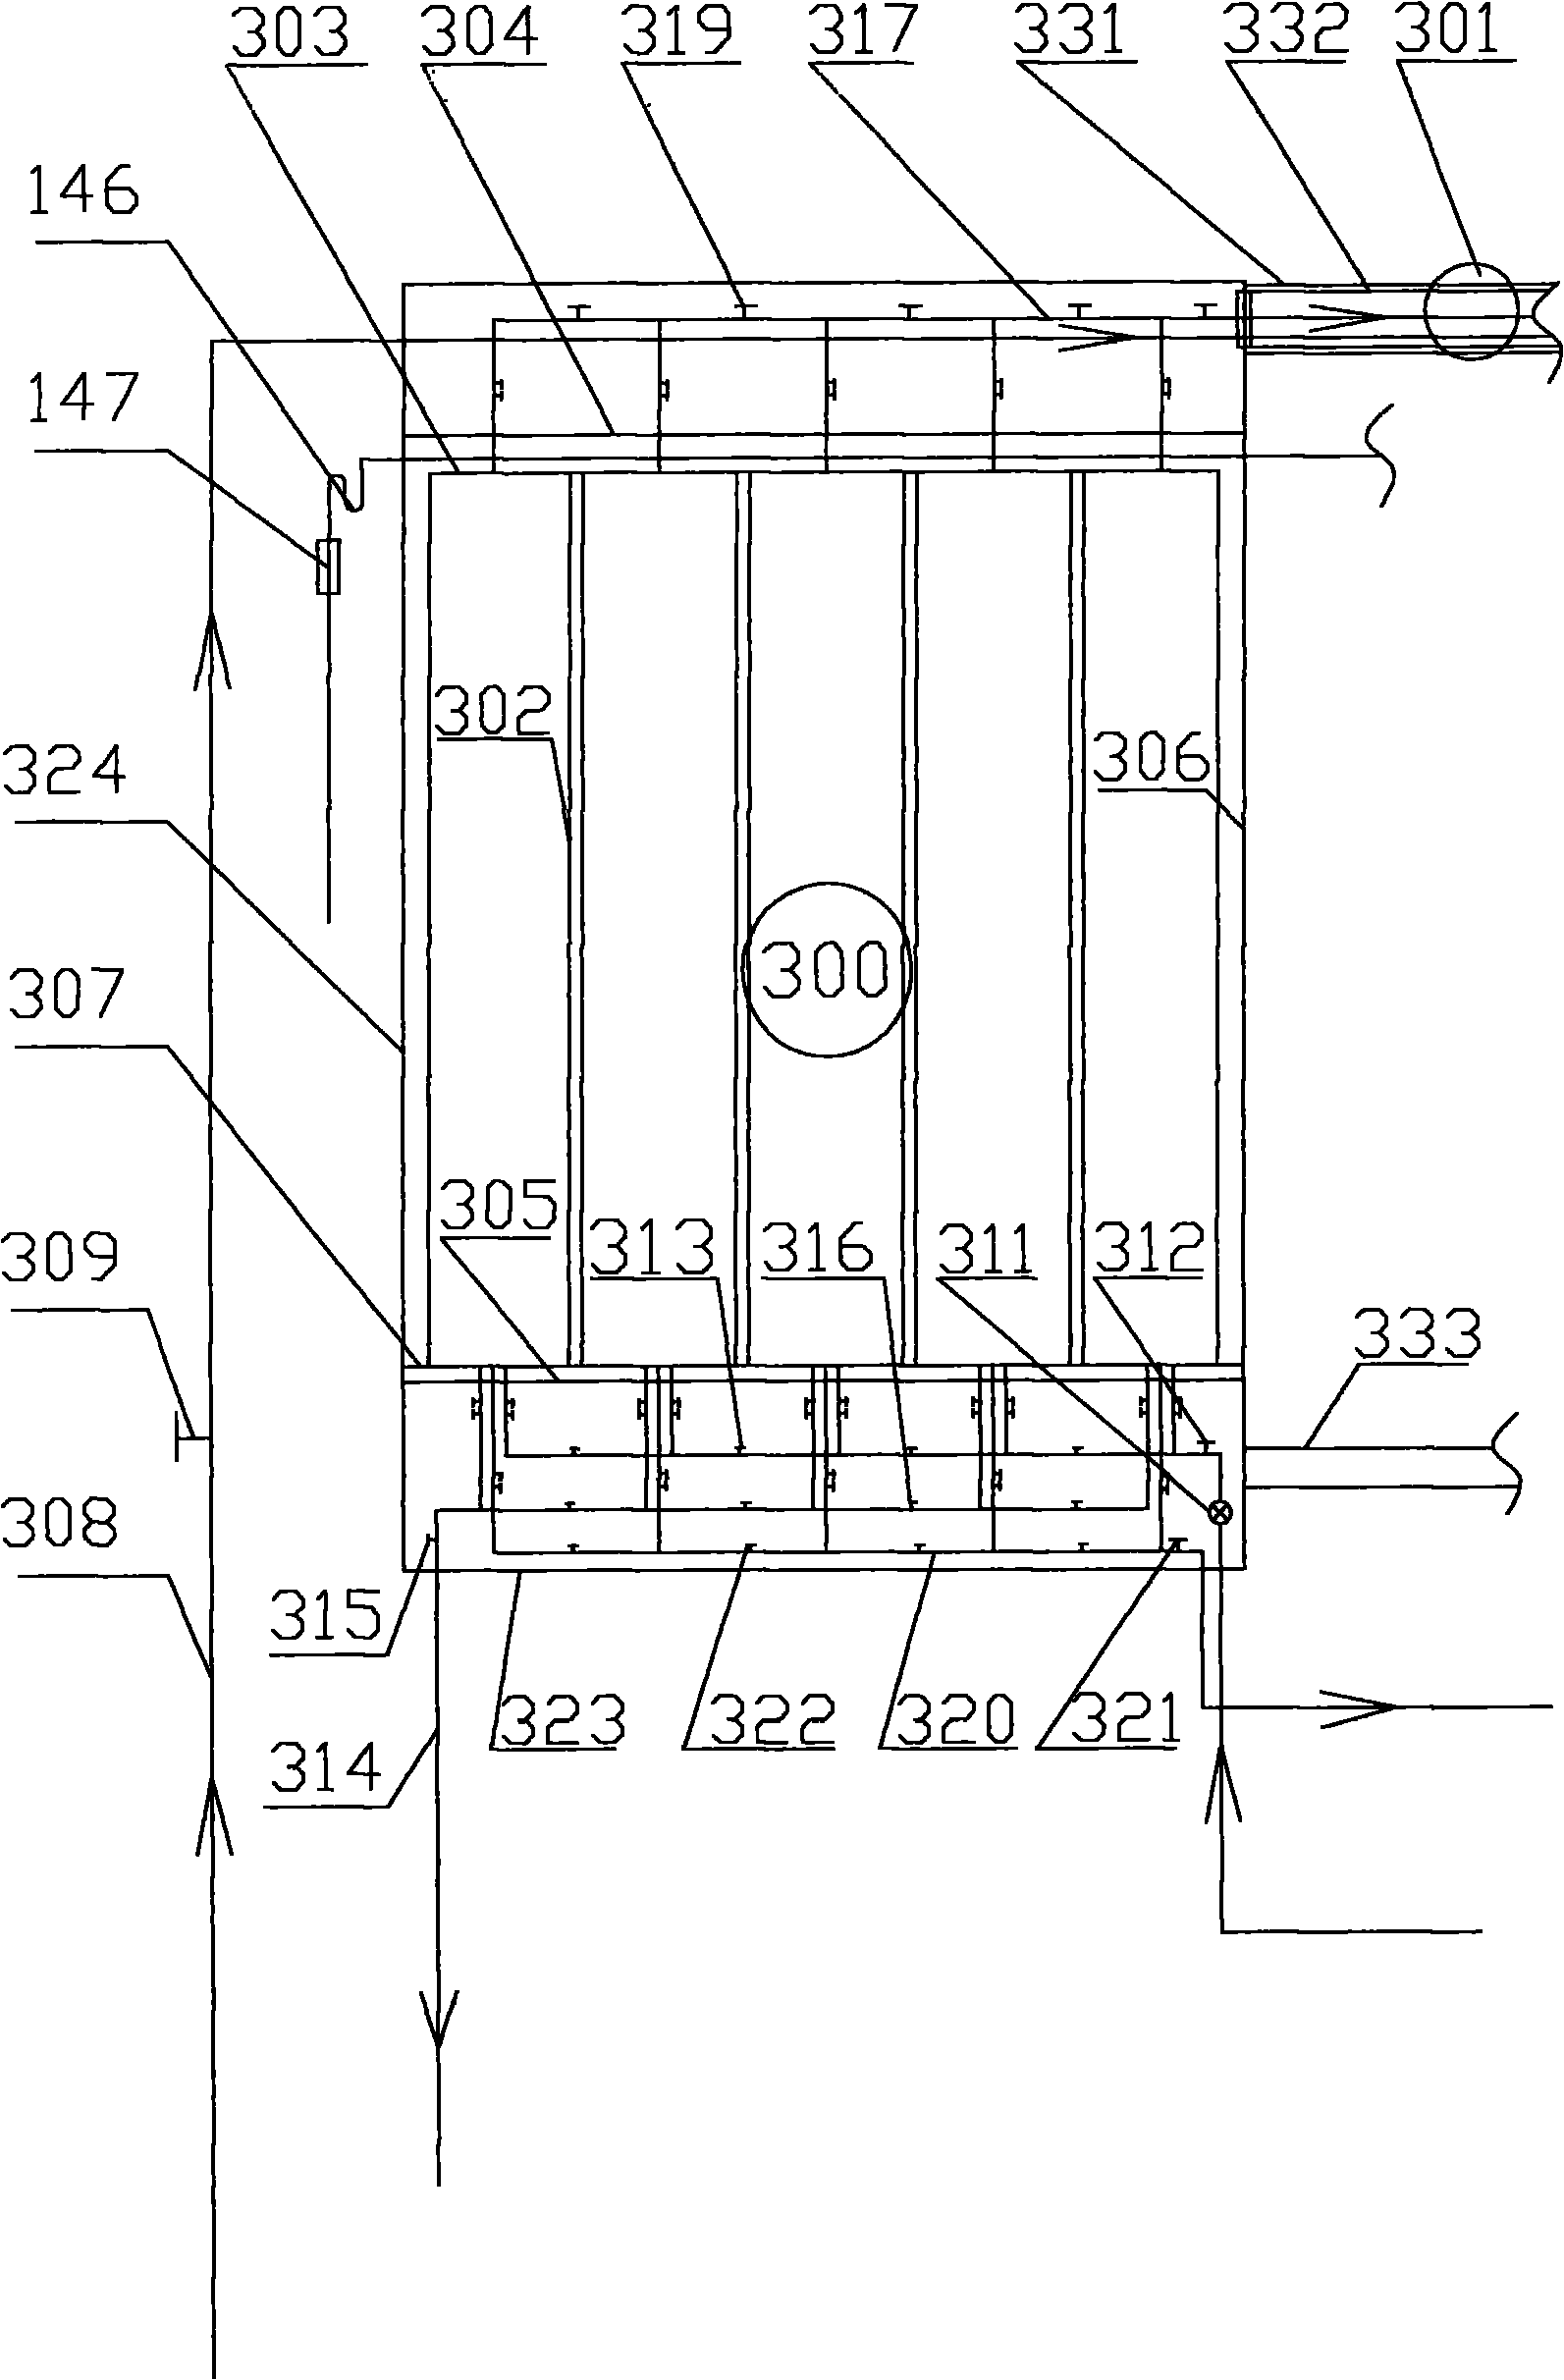 Quality grading water supply reforming method and system with roof water tank and building water supply pipe network